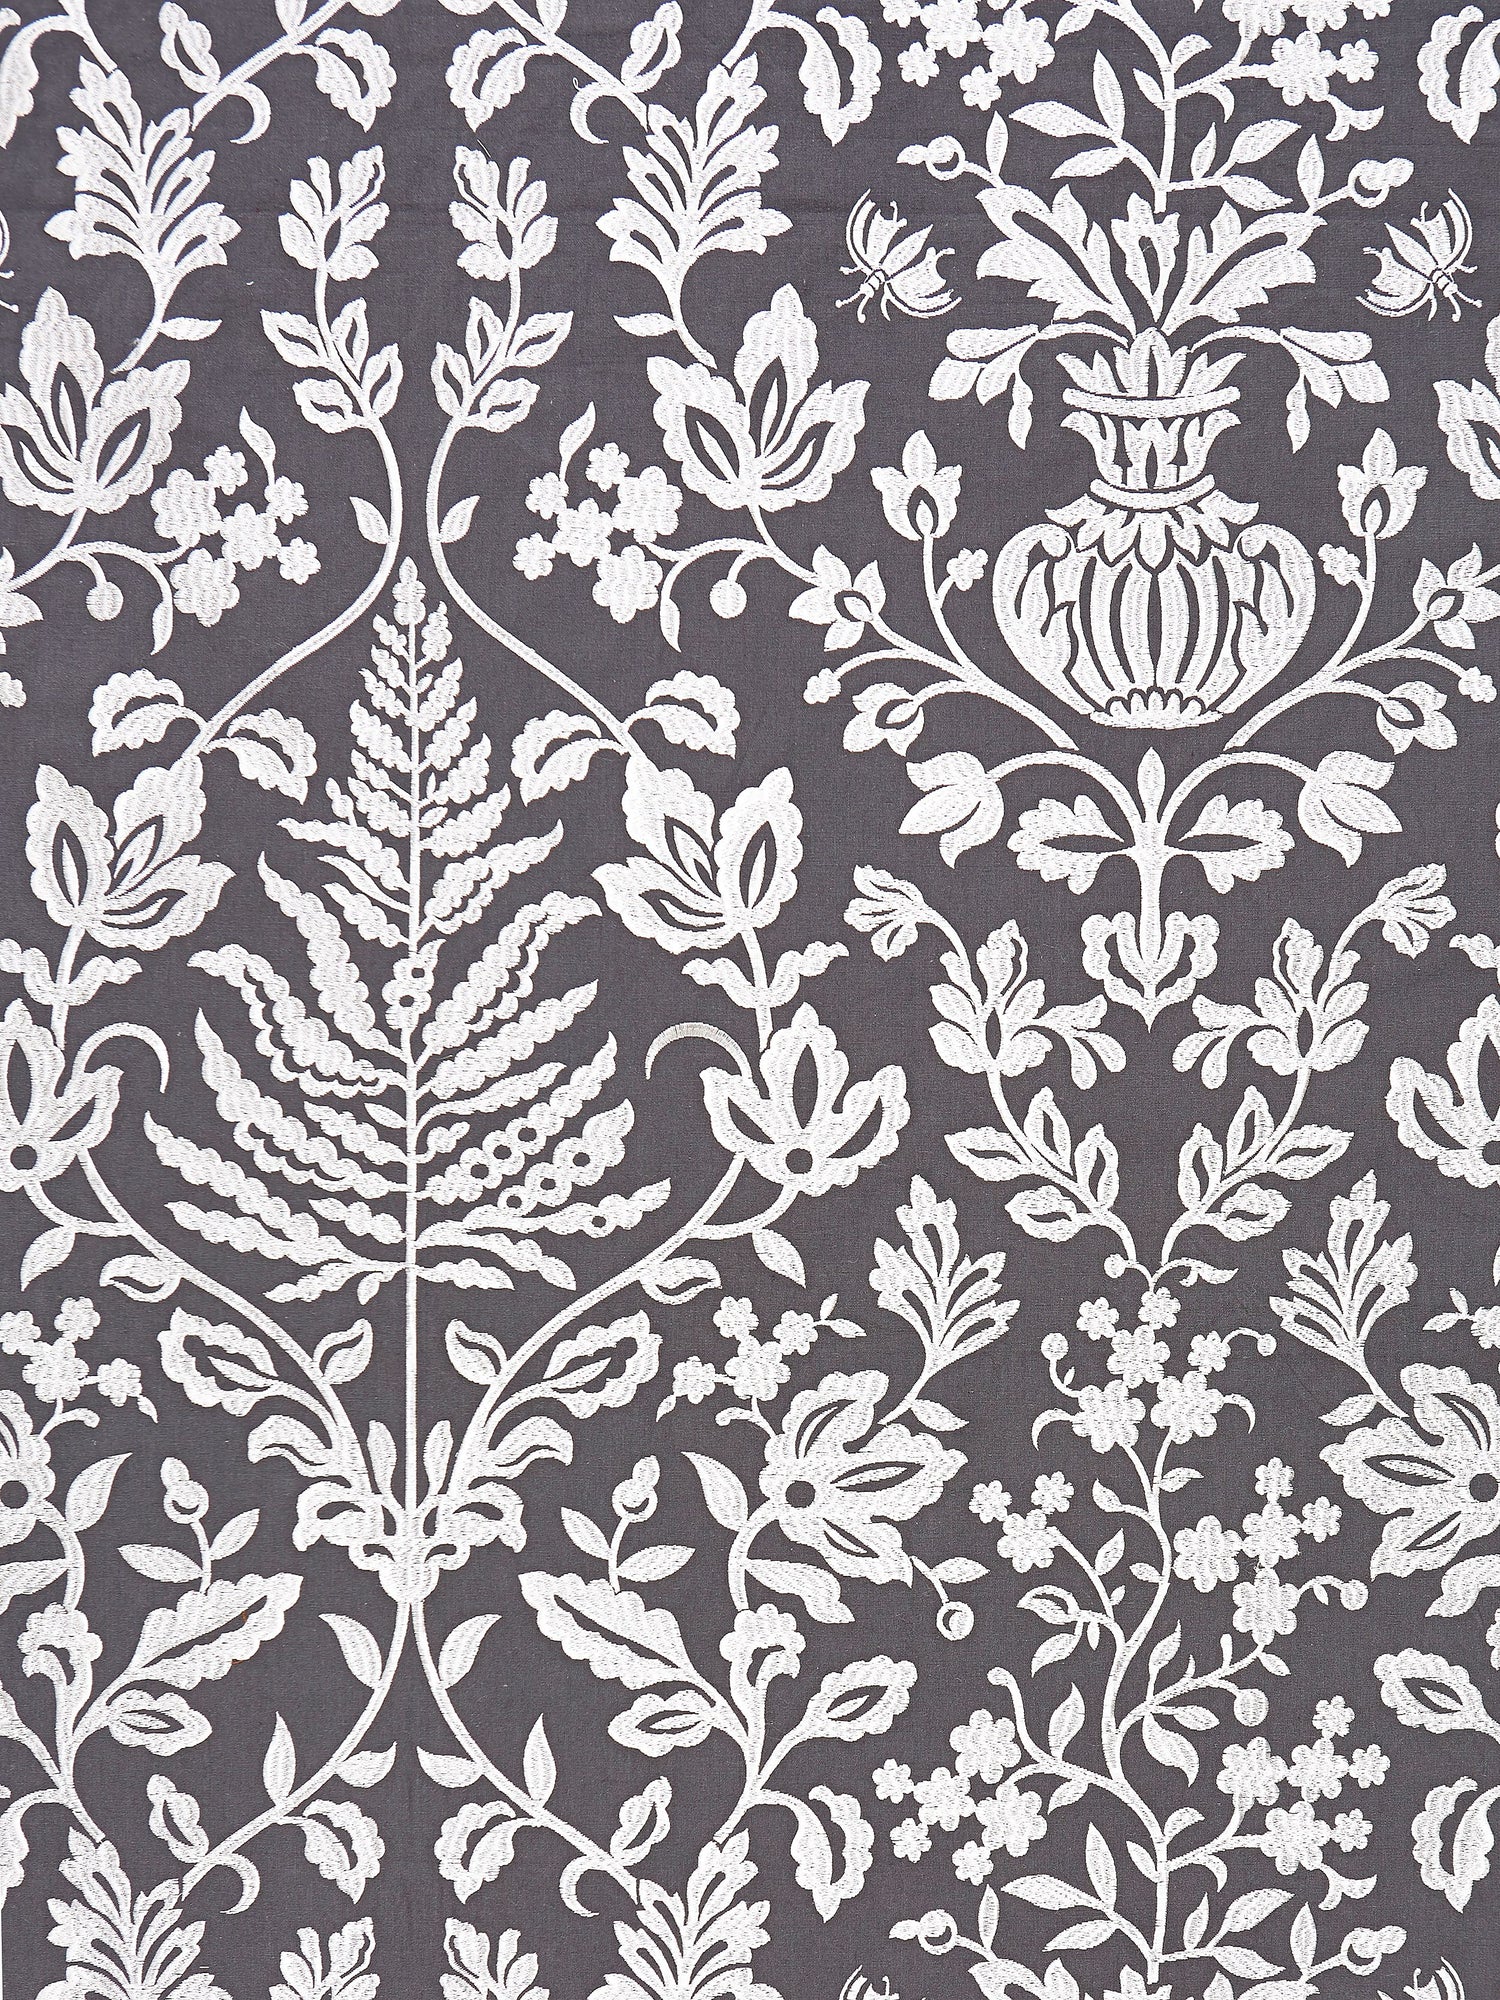 Shalimar Embroidery fabric in charcoal color - pattern number SC 000327032 - by Scalamandre in the Scalamandre Fabrics Book 1 collection